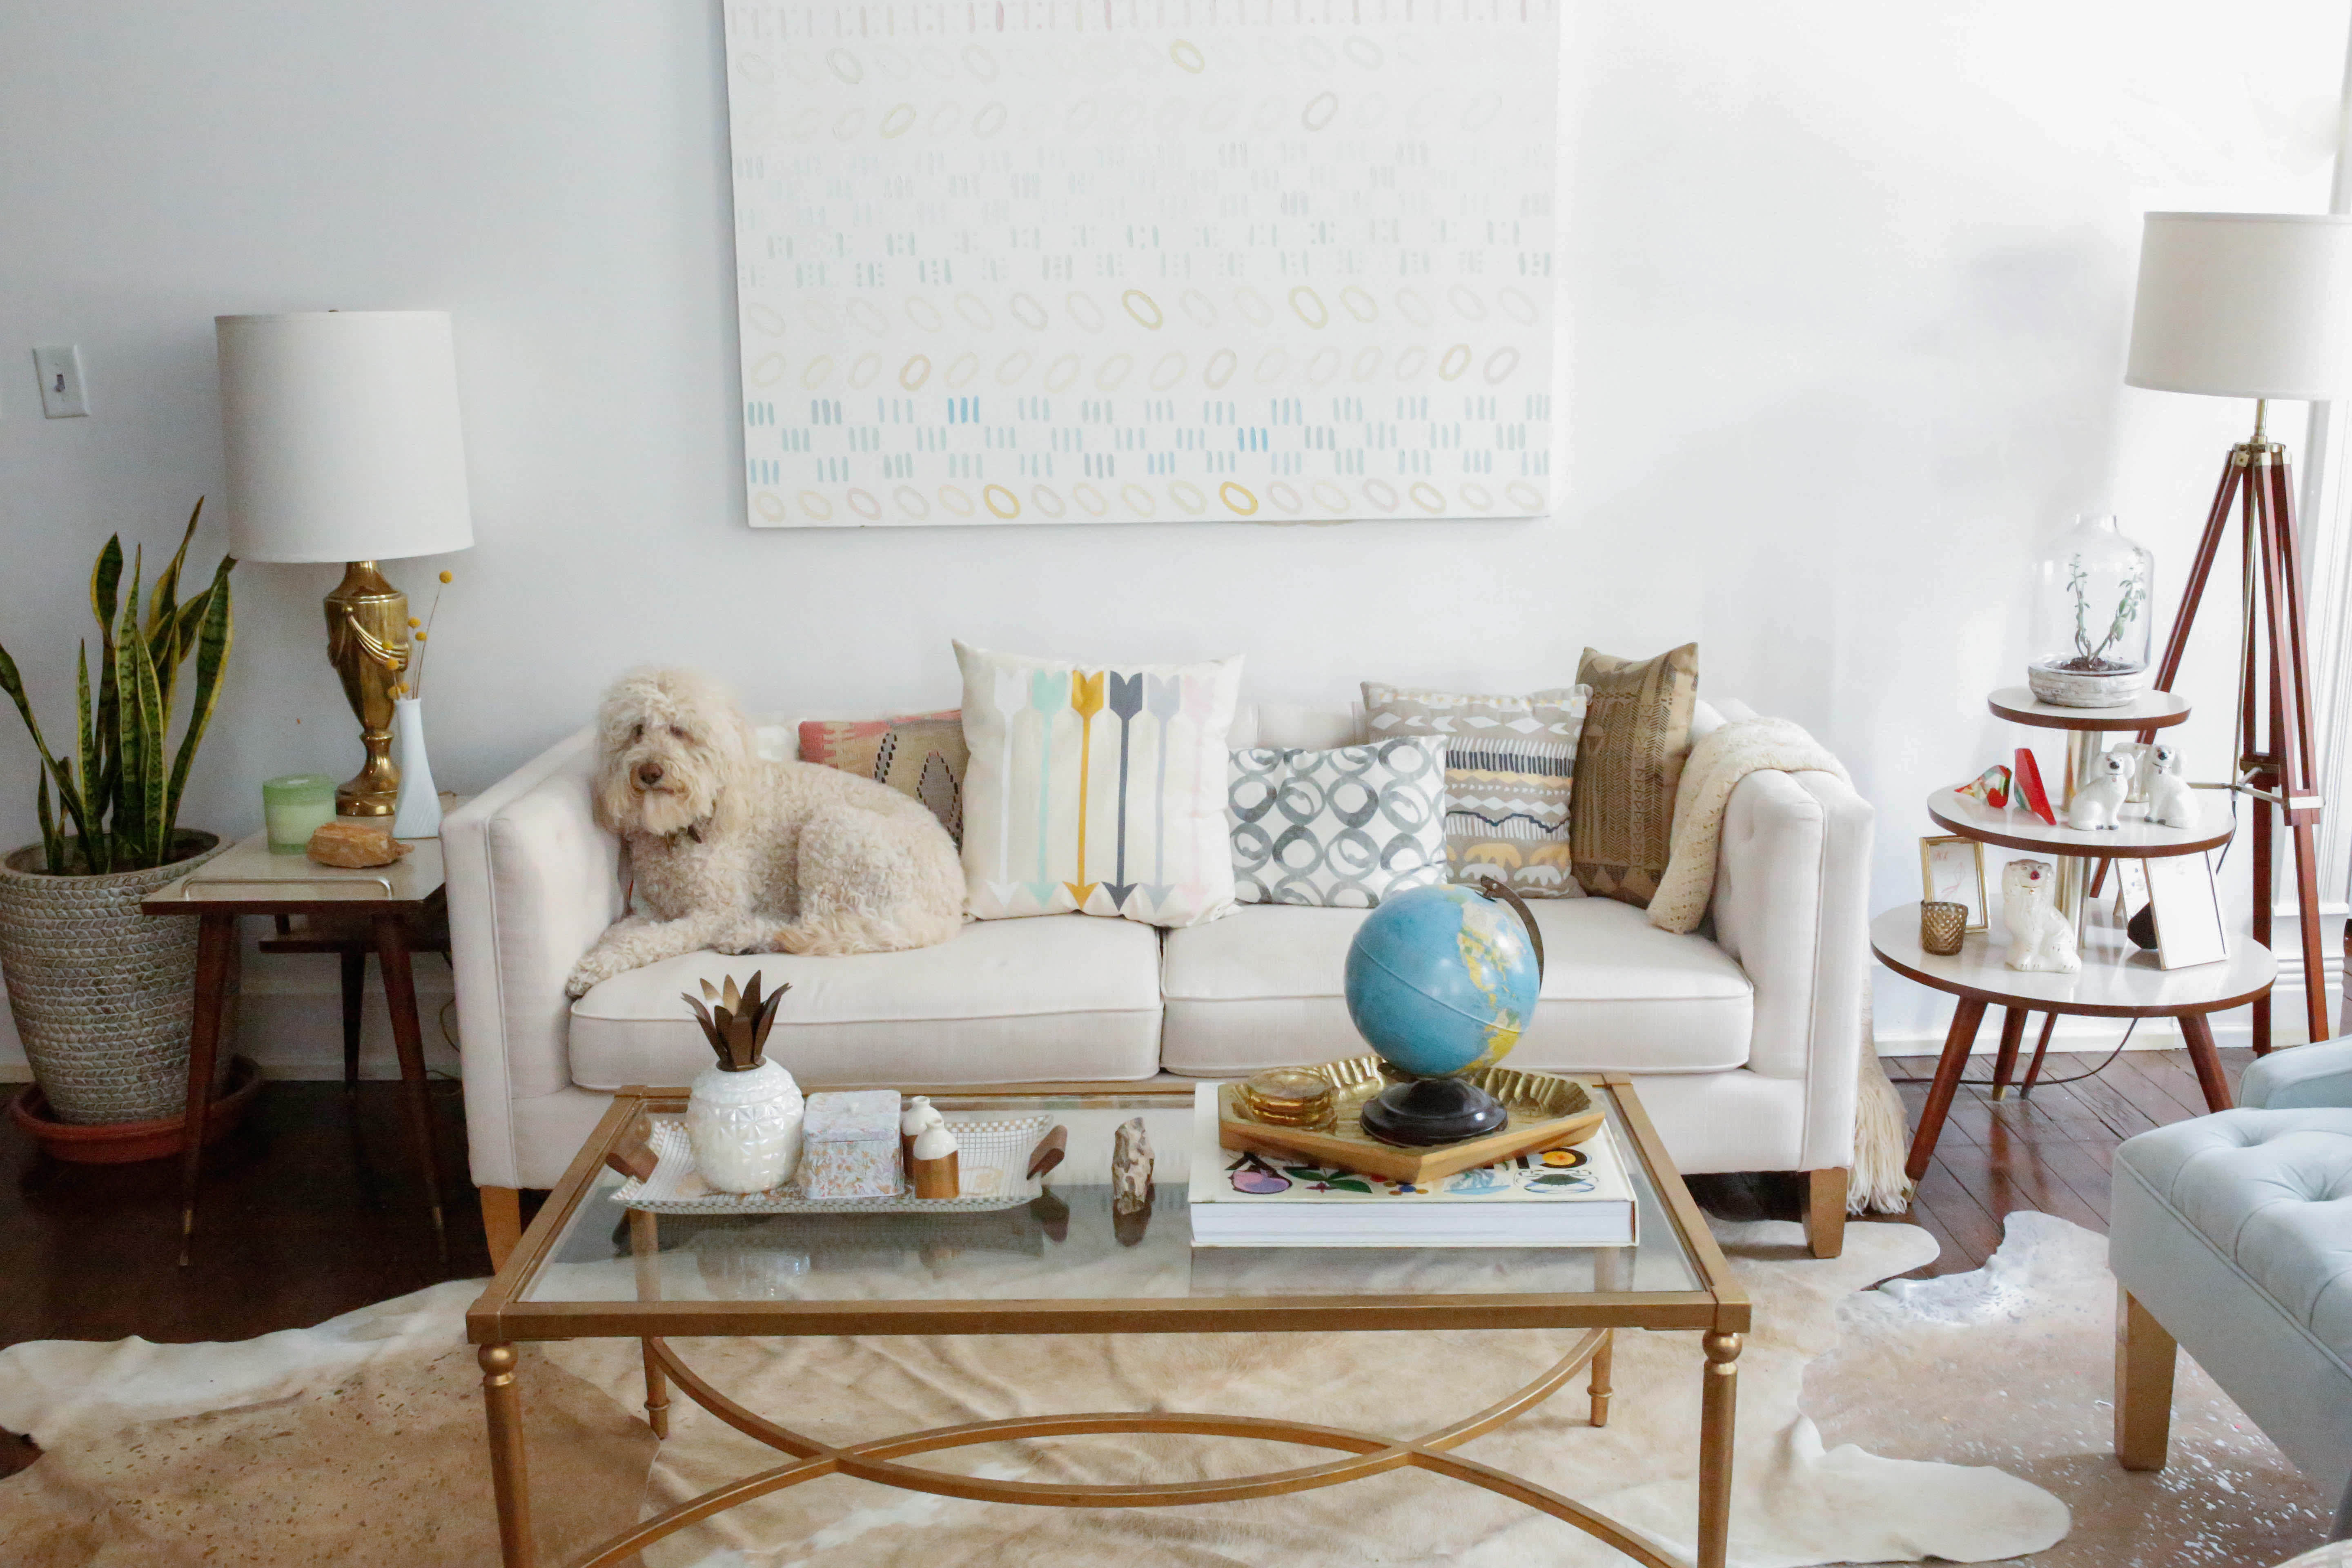 Styling experts share their insider tricks for arranging sofa cushions  perfectly every time